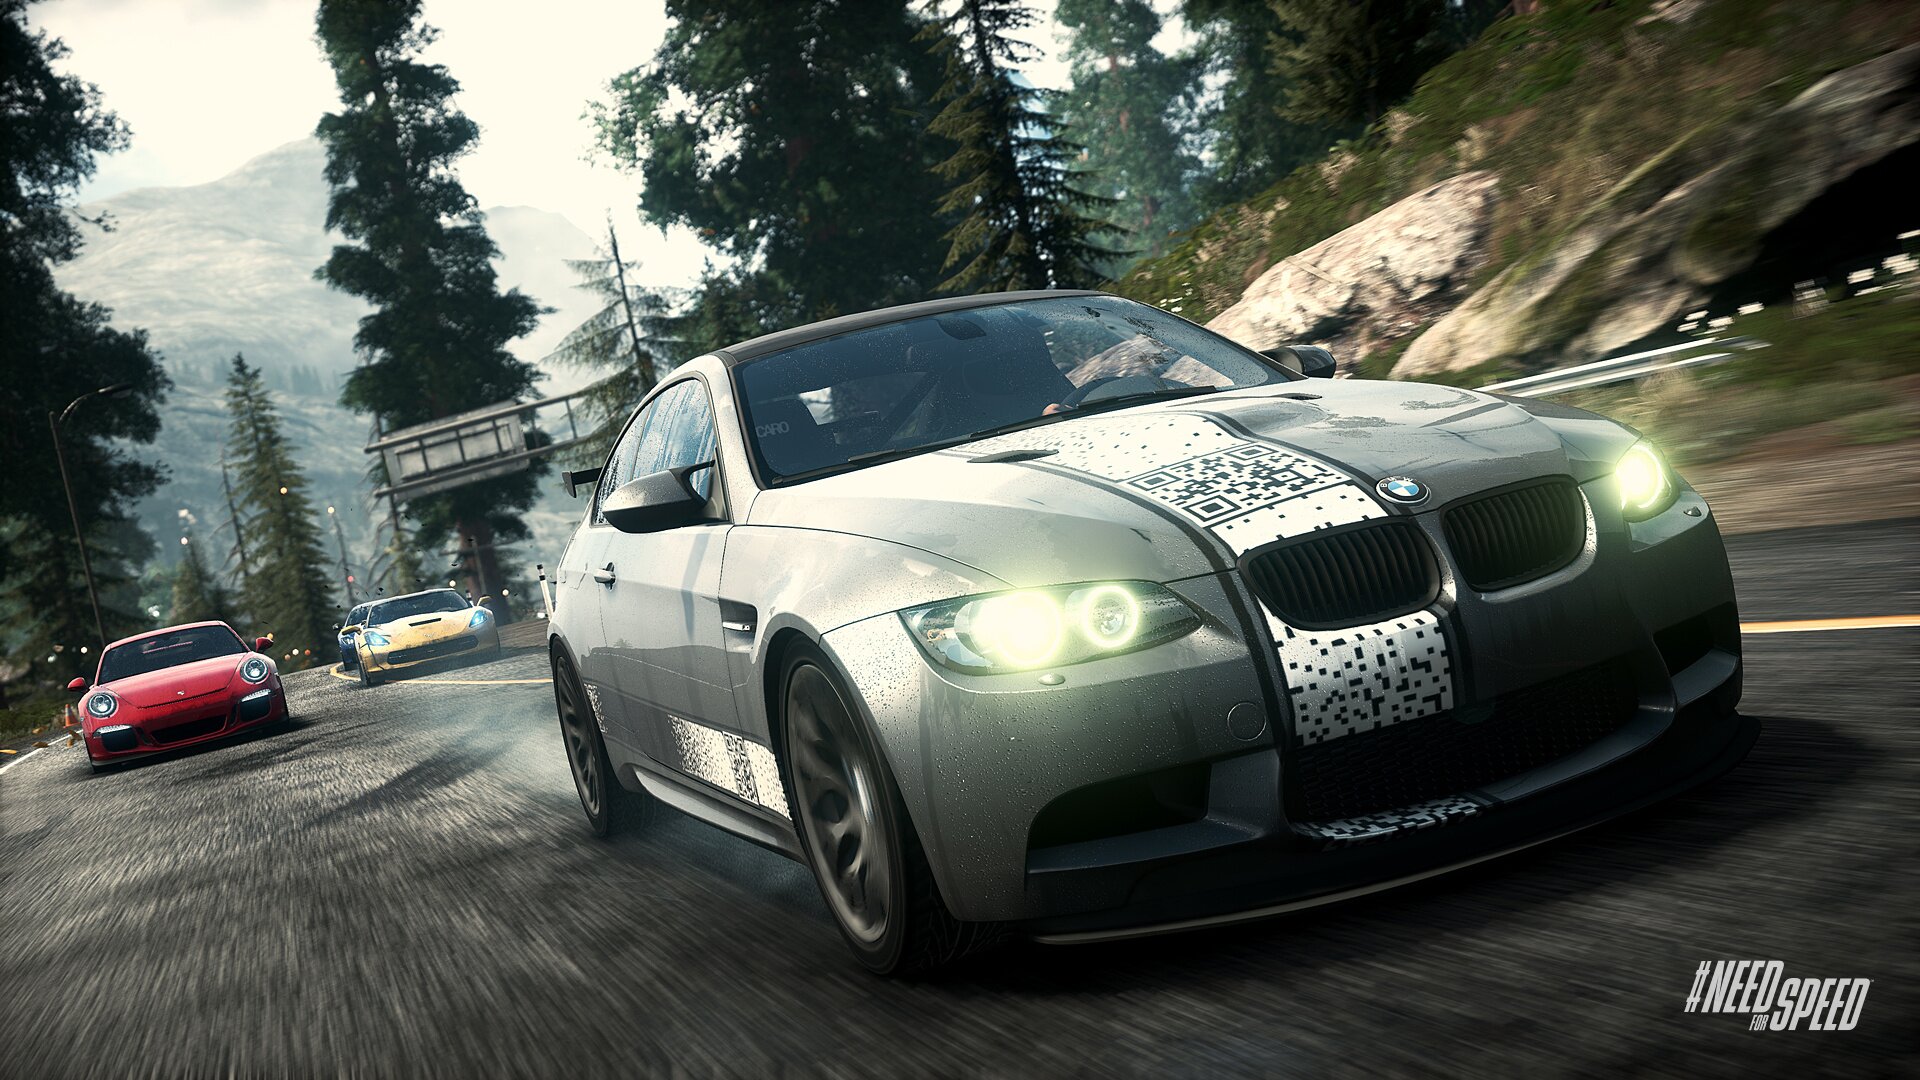 Review: Need For Speed: Rivals, rivals need for speed 